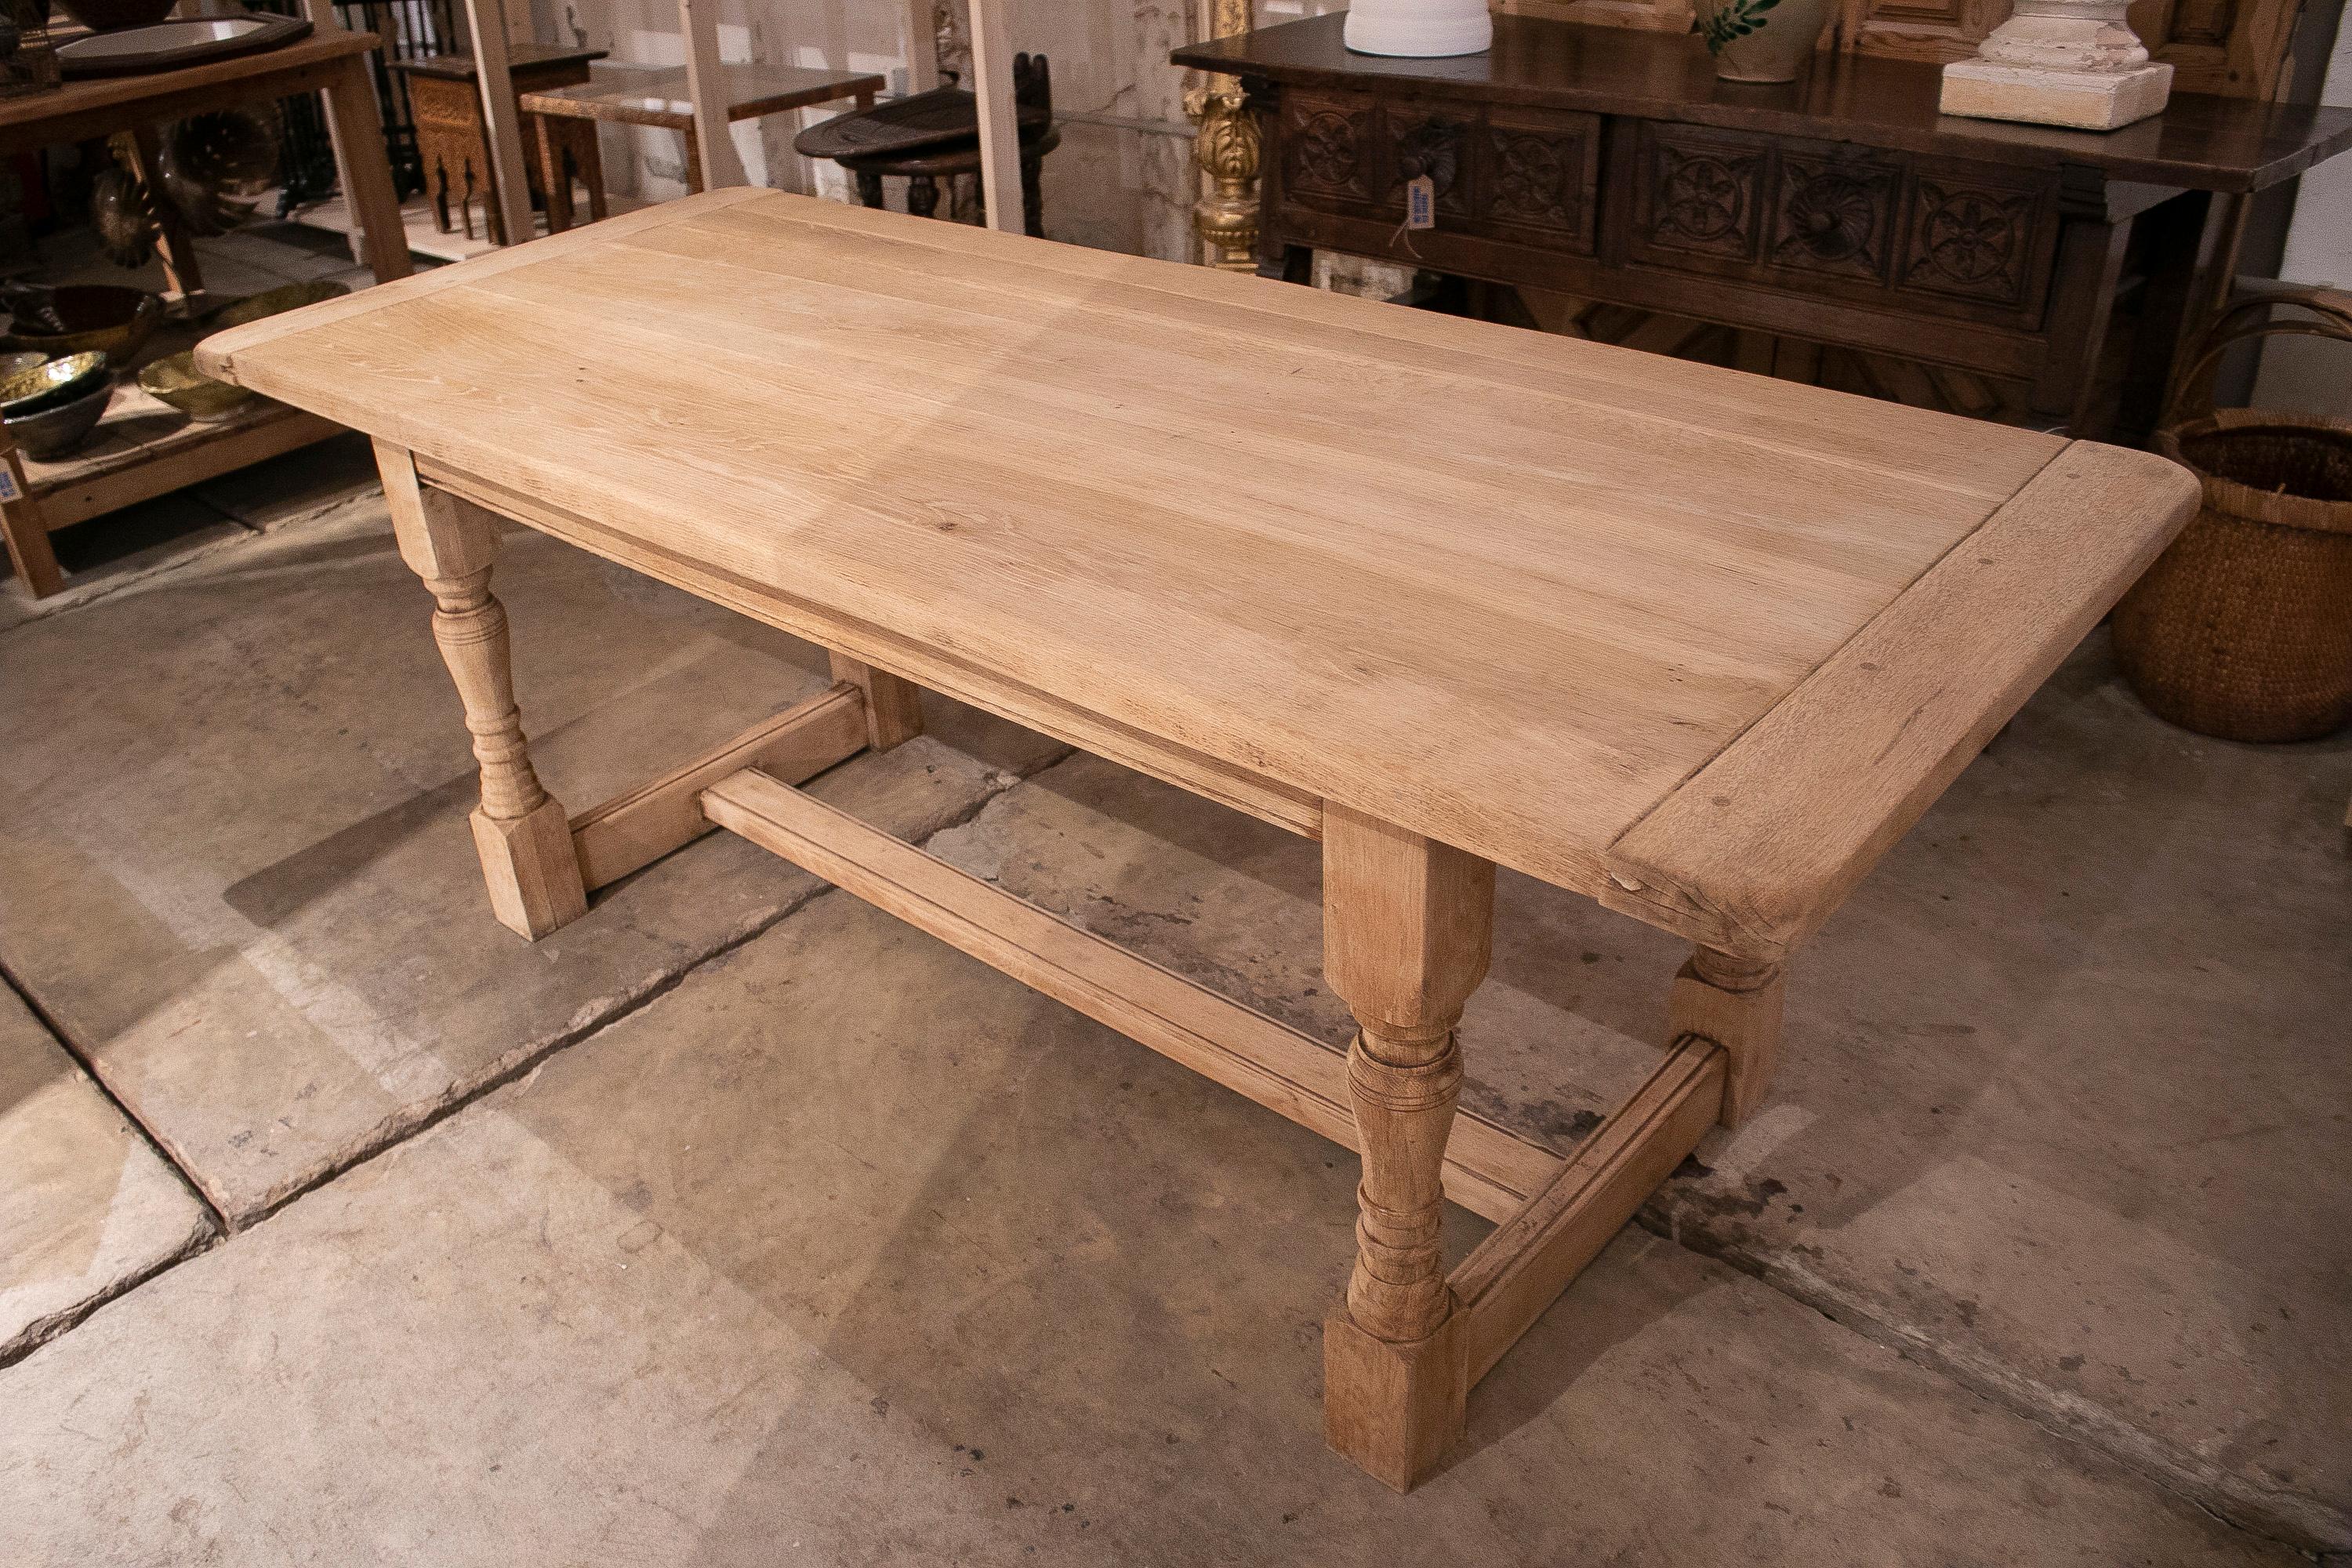 Rustic 1930s Spanish washed wood dining table with crossbeam.